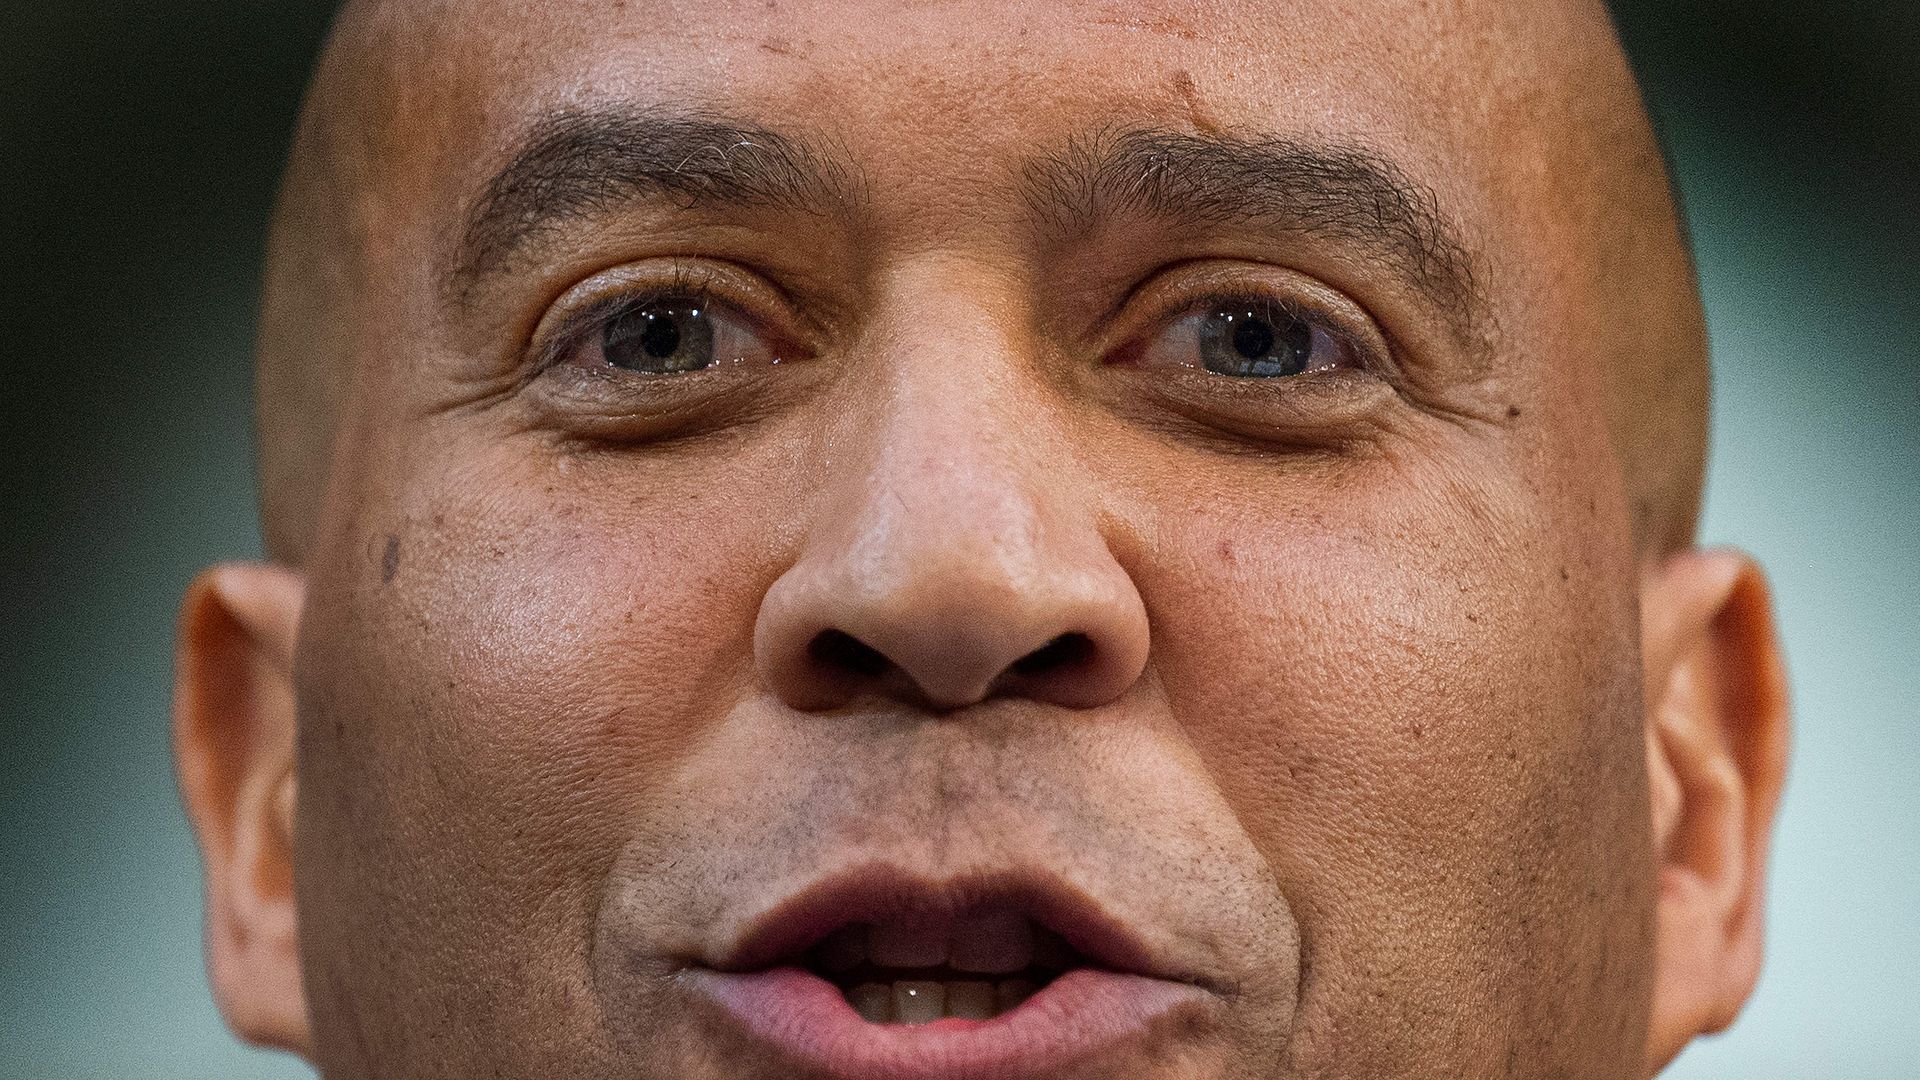 Sen. Cory Booker is seen in a close-up photo.